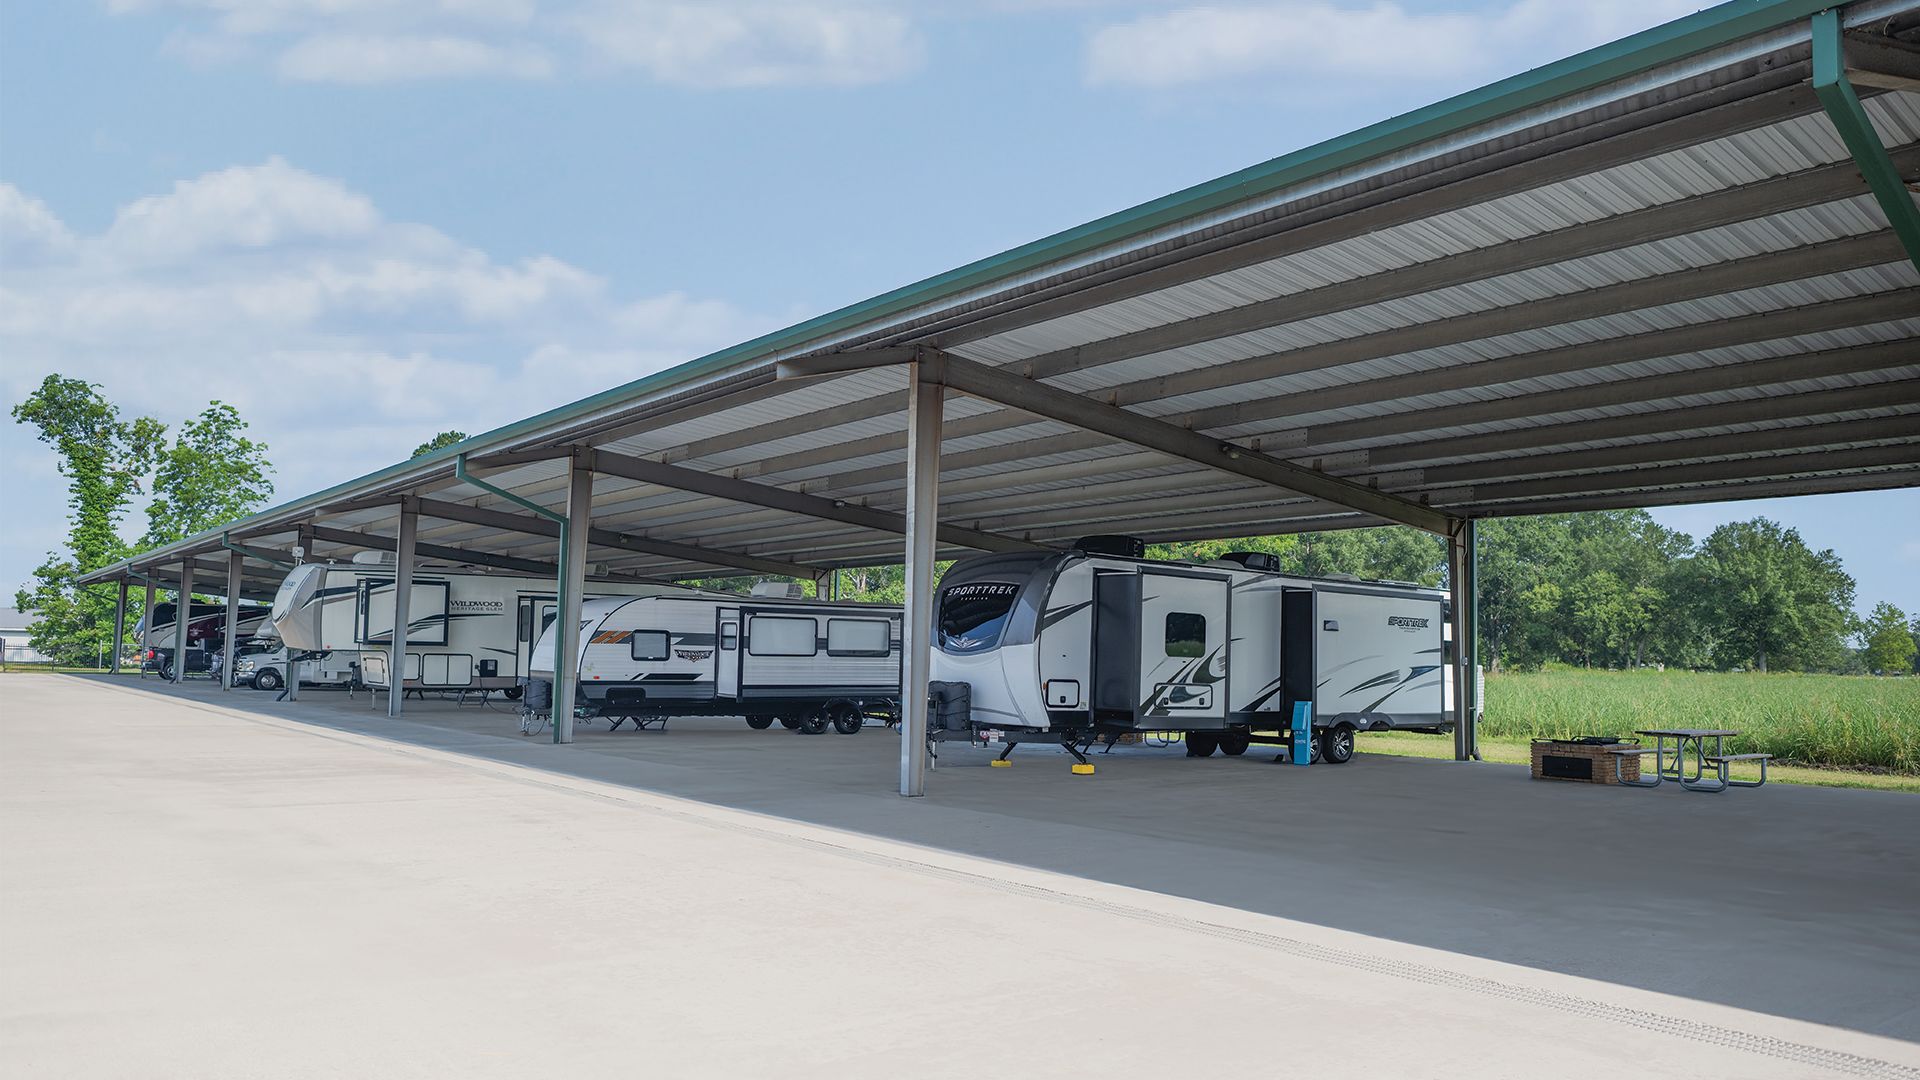 A Group Of Rvs Parked Under A Covered Area